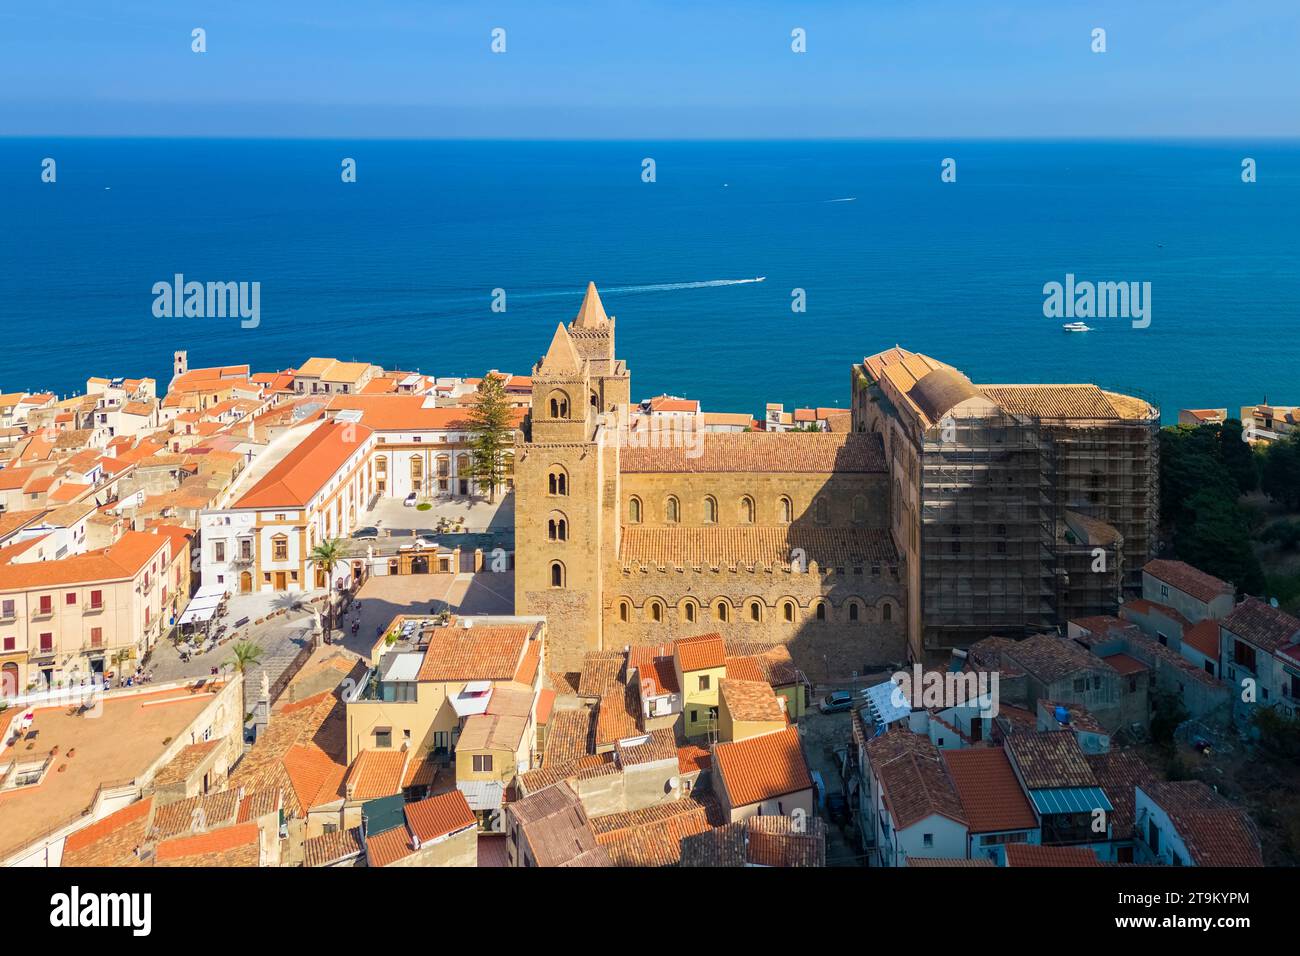 Aerial view of the ancient town of Cefalù, Unesco World Heritage site, at sunset. Palermo district, Sicily, Italy. Stock Photo